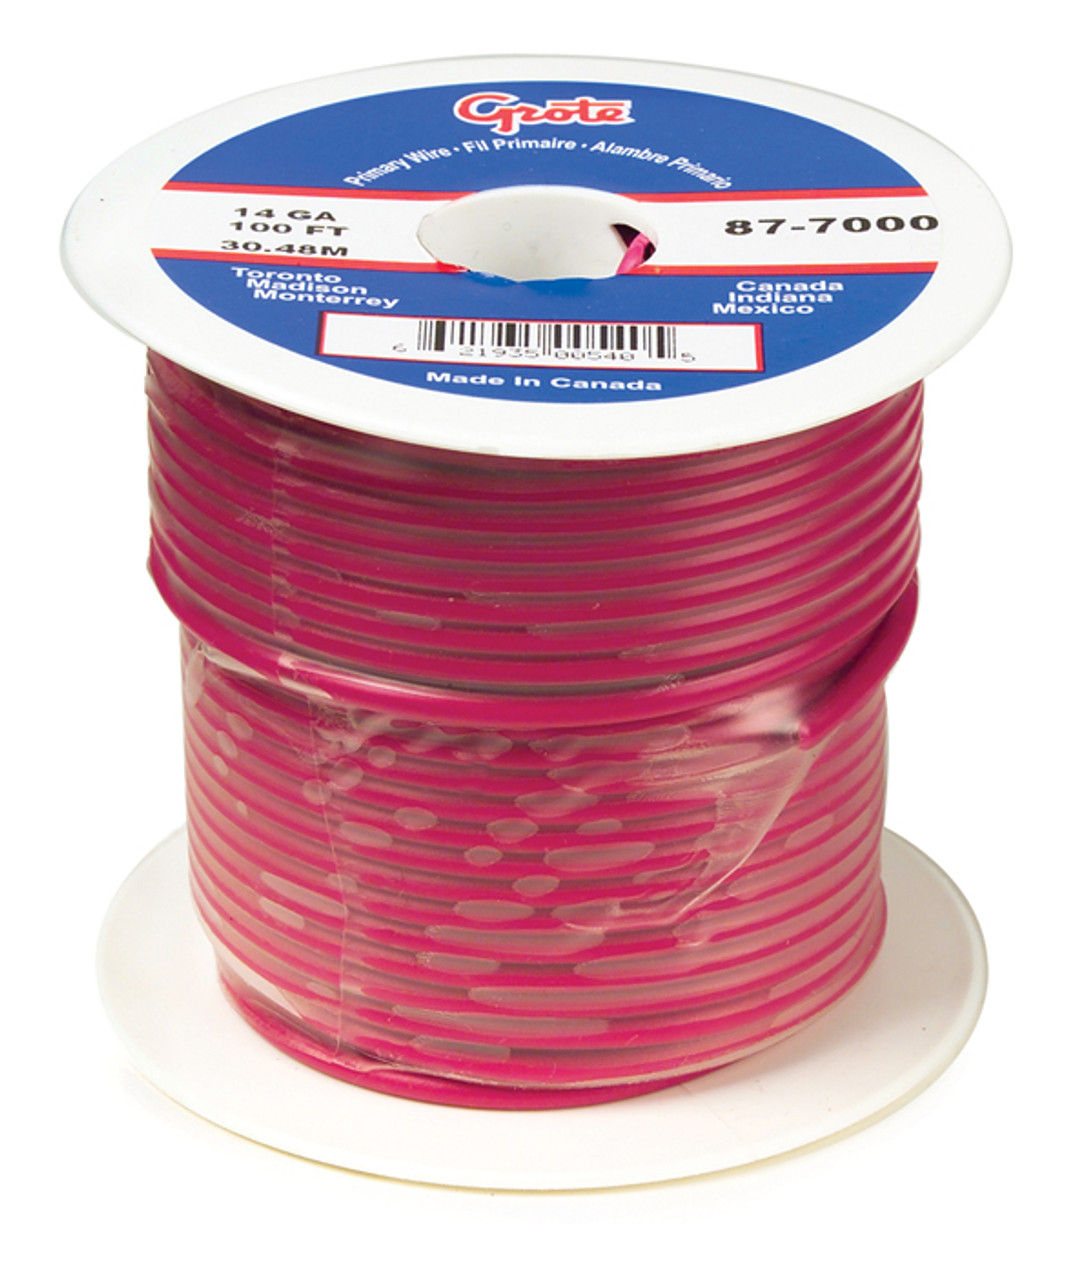 18 AWG General Purpose Thermo Plastic Wire @ 100' - Red  87-9000